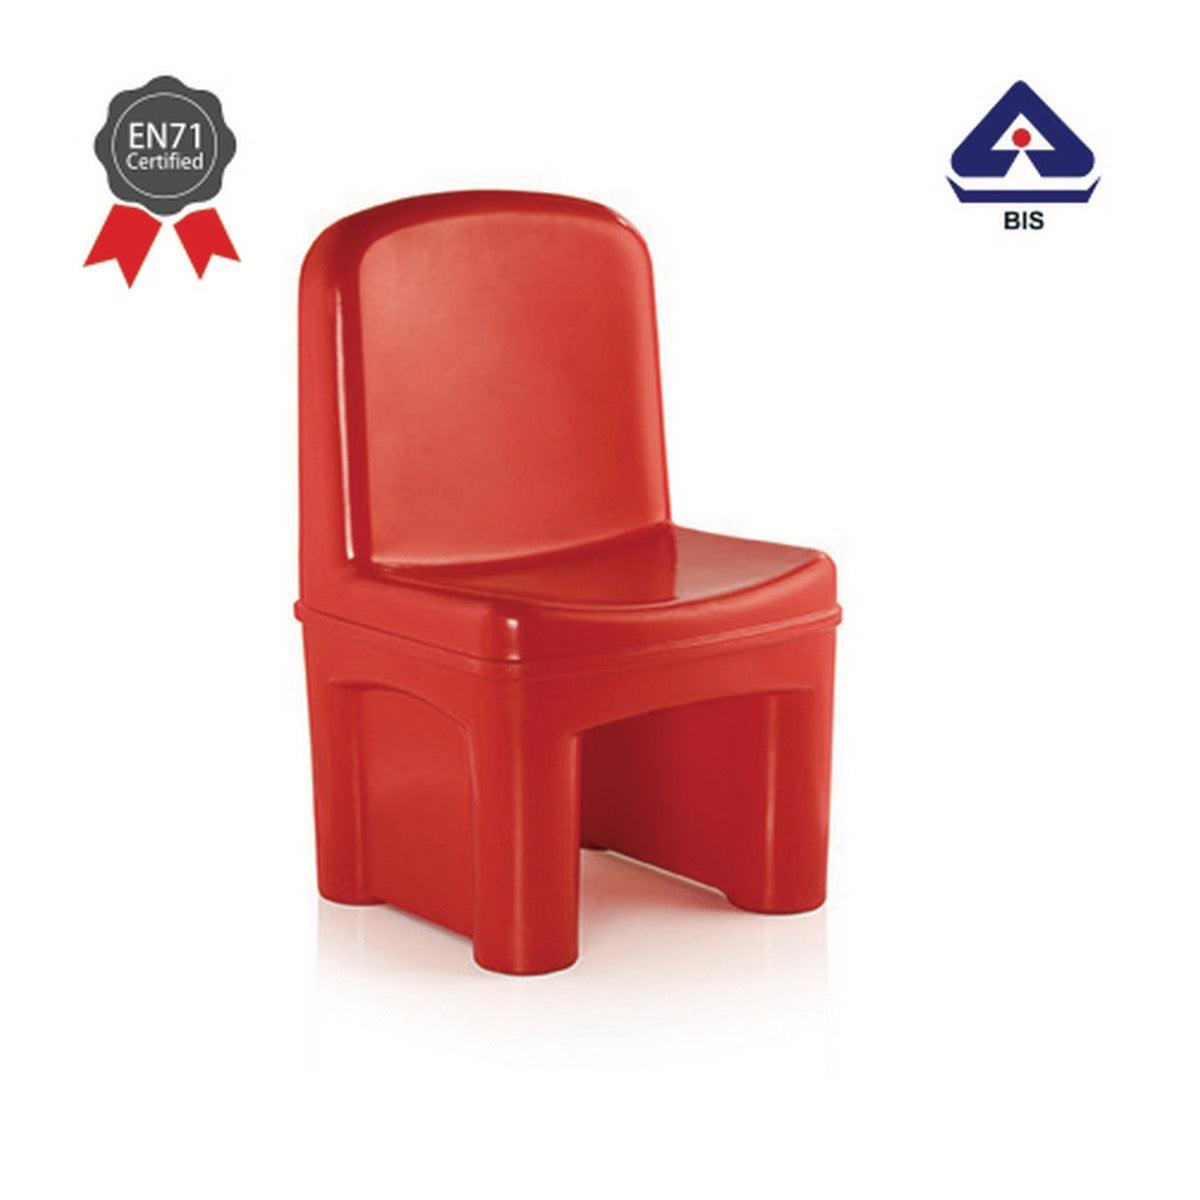 Ok Play Genius Group Chair, Medium Chair, Perfect For Home And School, Red, 2 to 4 Years